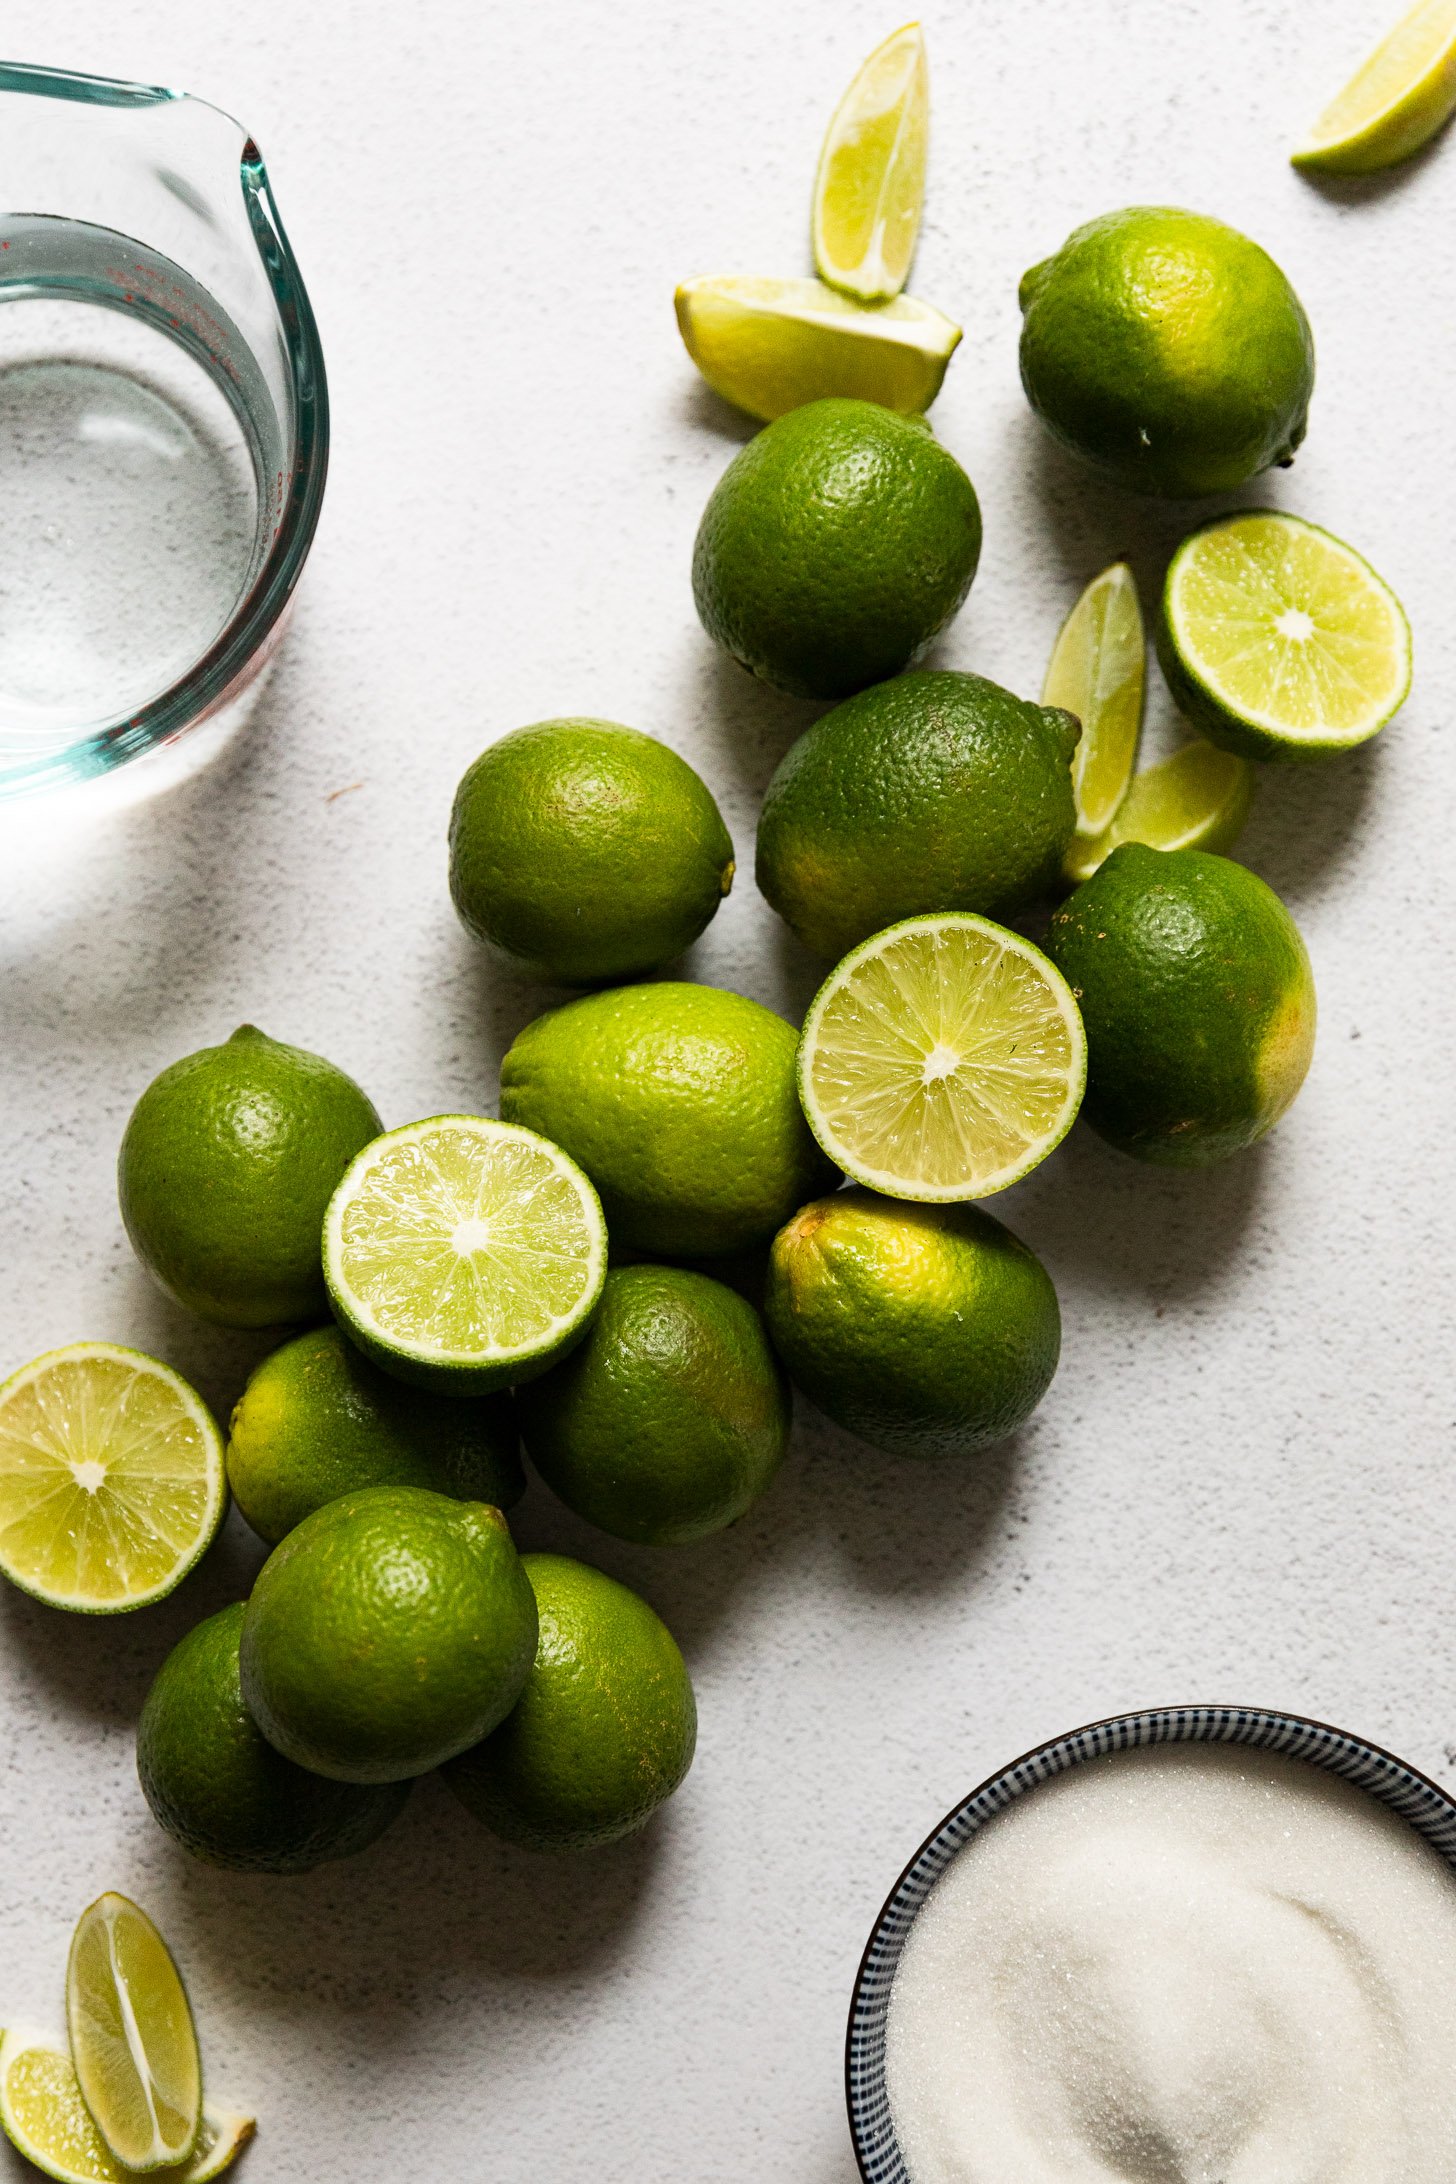 Whole and cut limes next to lime juice and sugar.